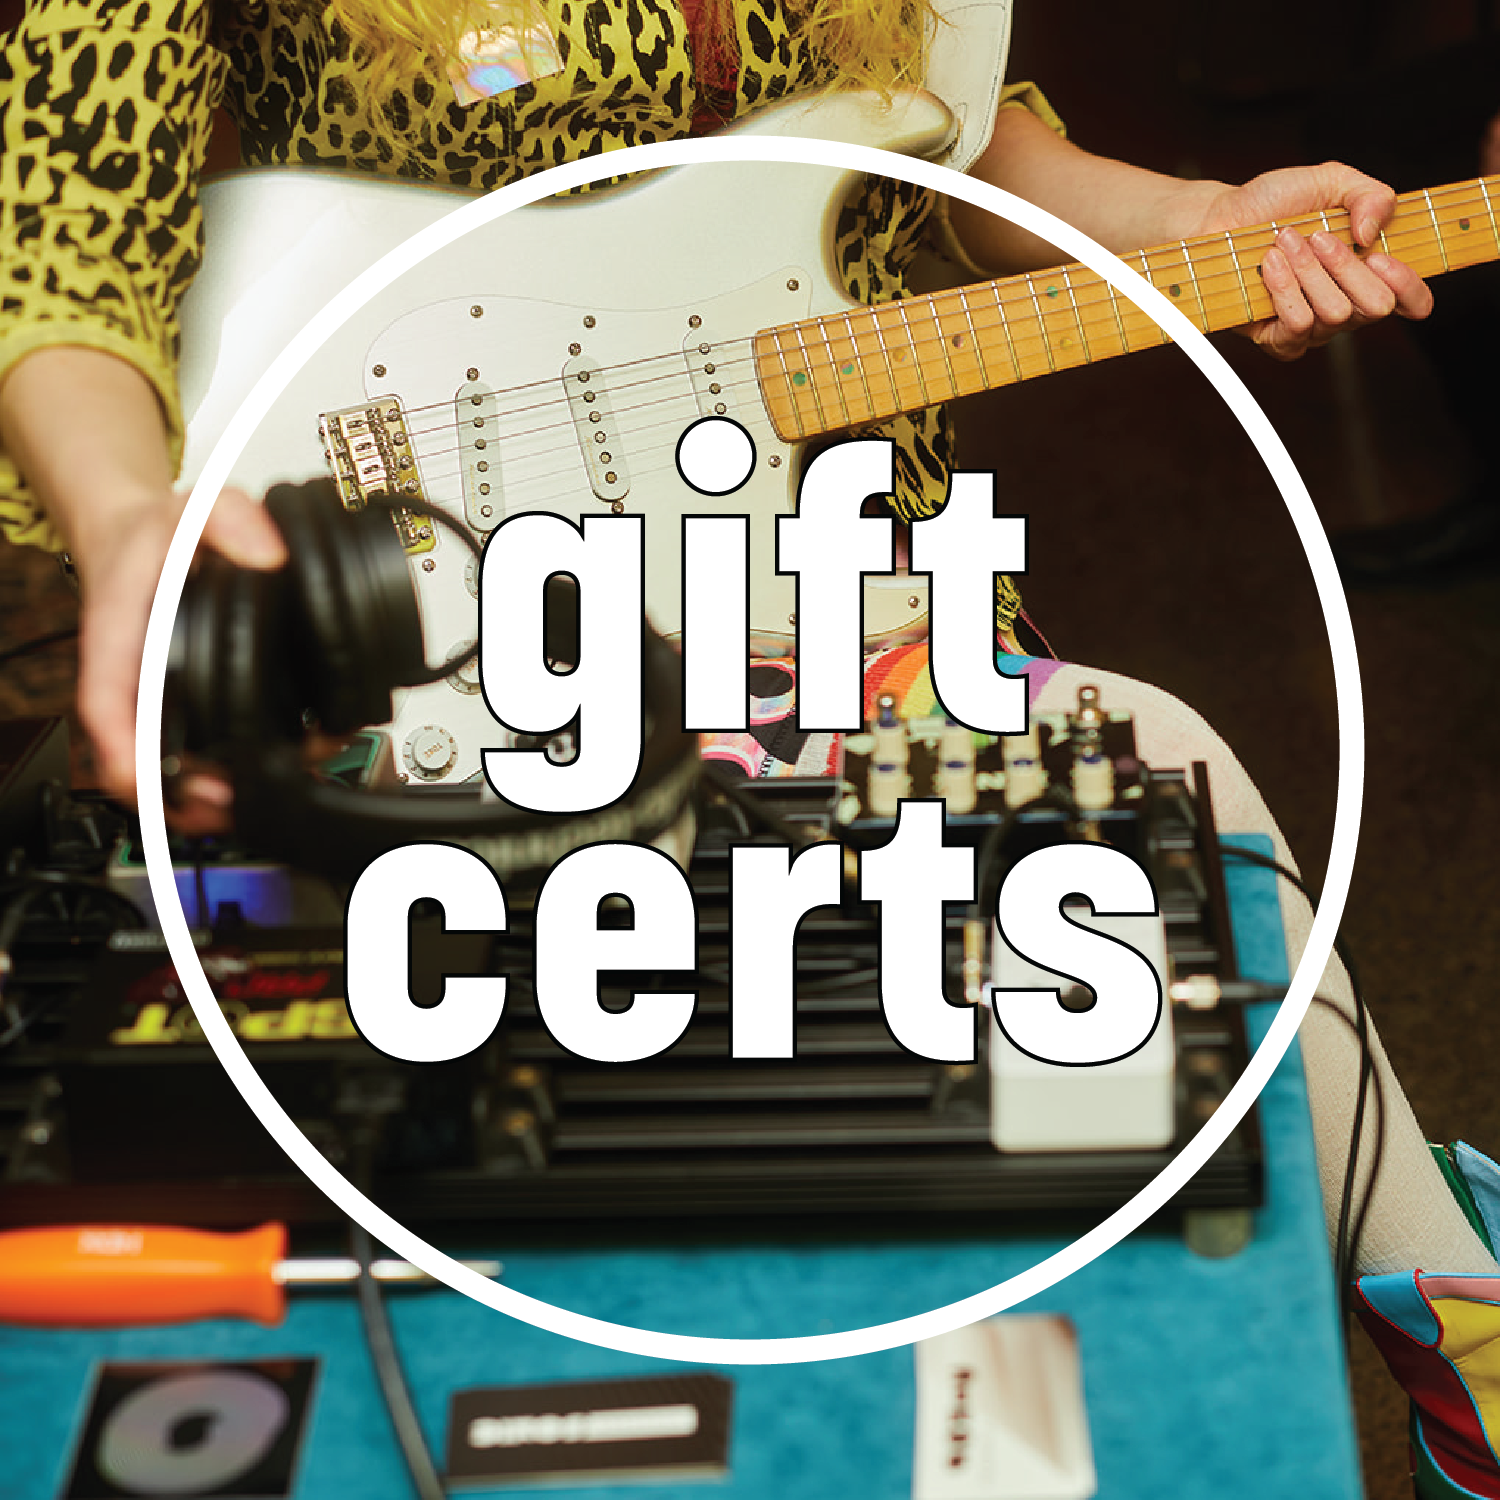 Image shows person holding guitar and reaching for headphones. White circle features white text that reads "gift certs"